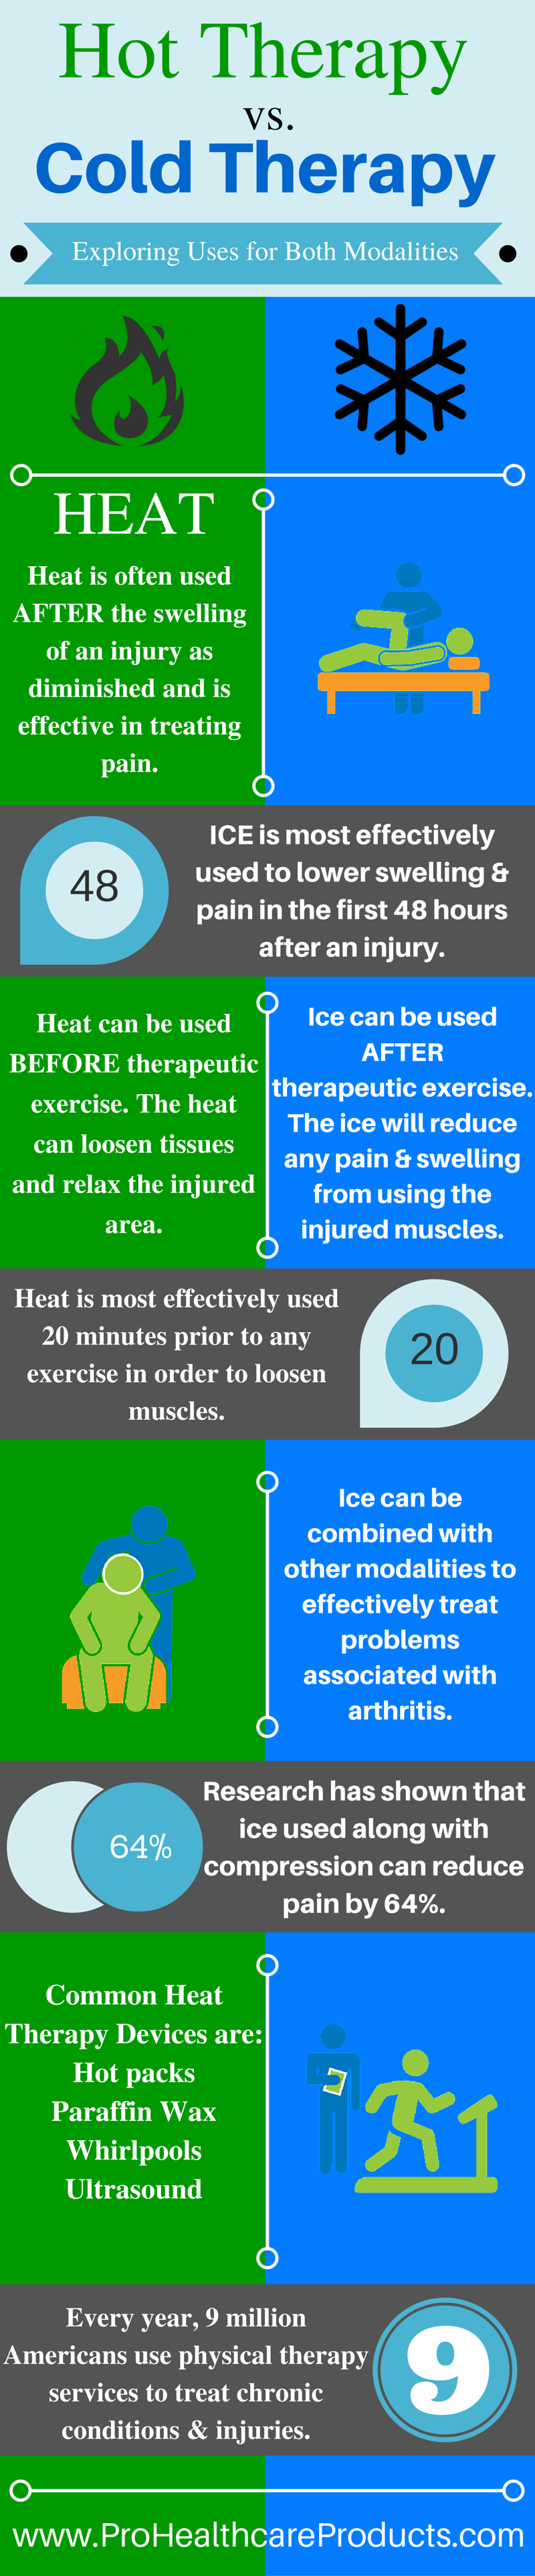 Hot Therapy vs. Cold Therapy Infographic